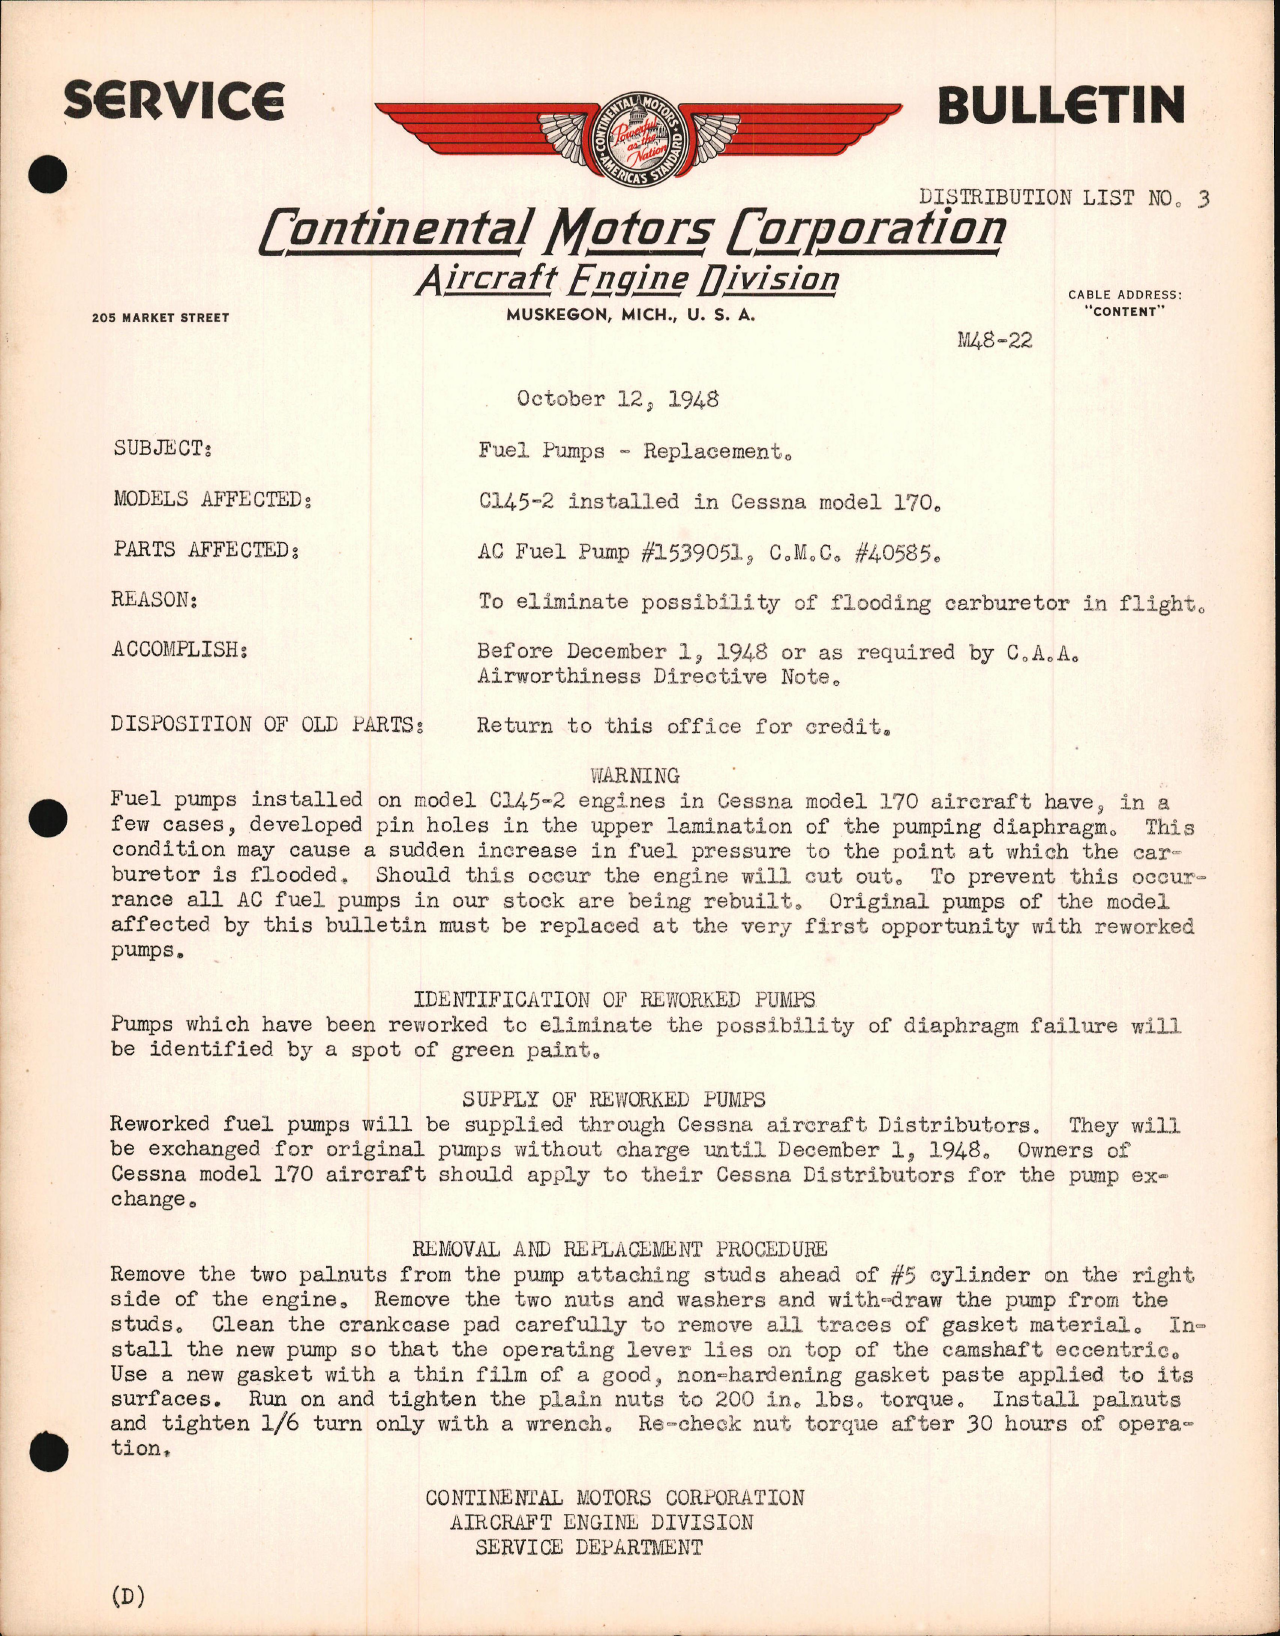 Sample page 1 from AirCorps Library document: Fuel Pumps - Replacement